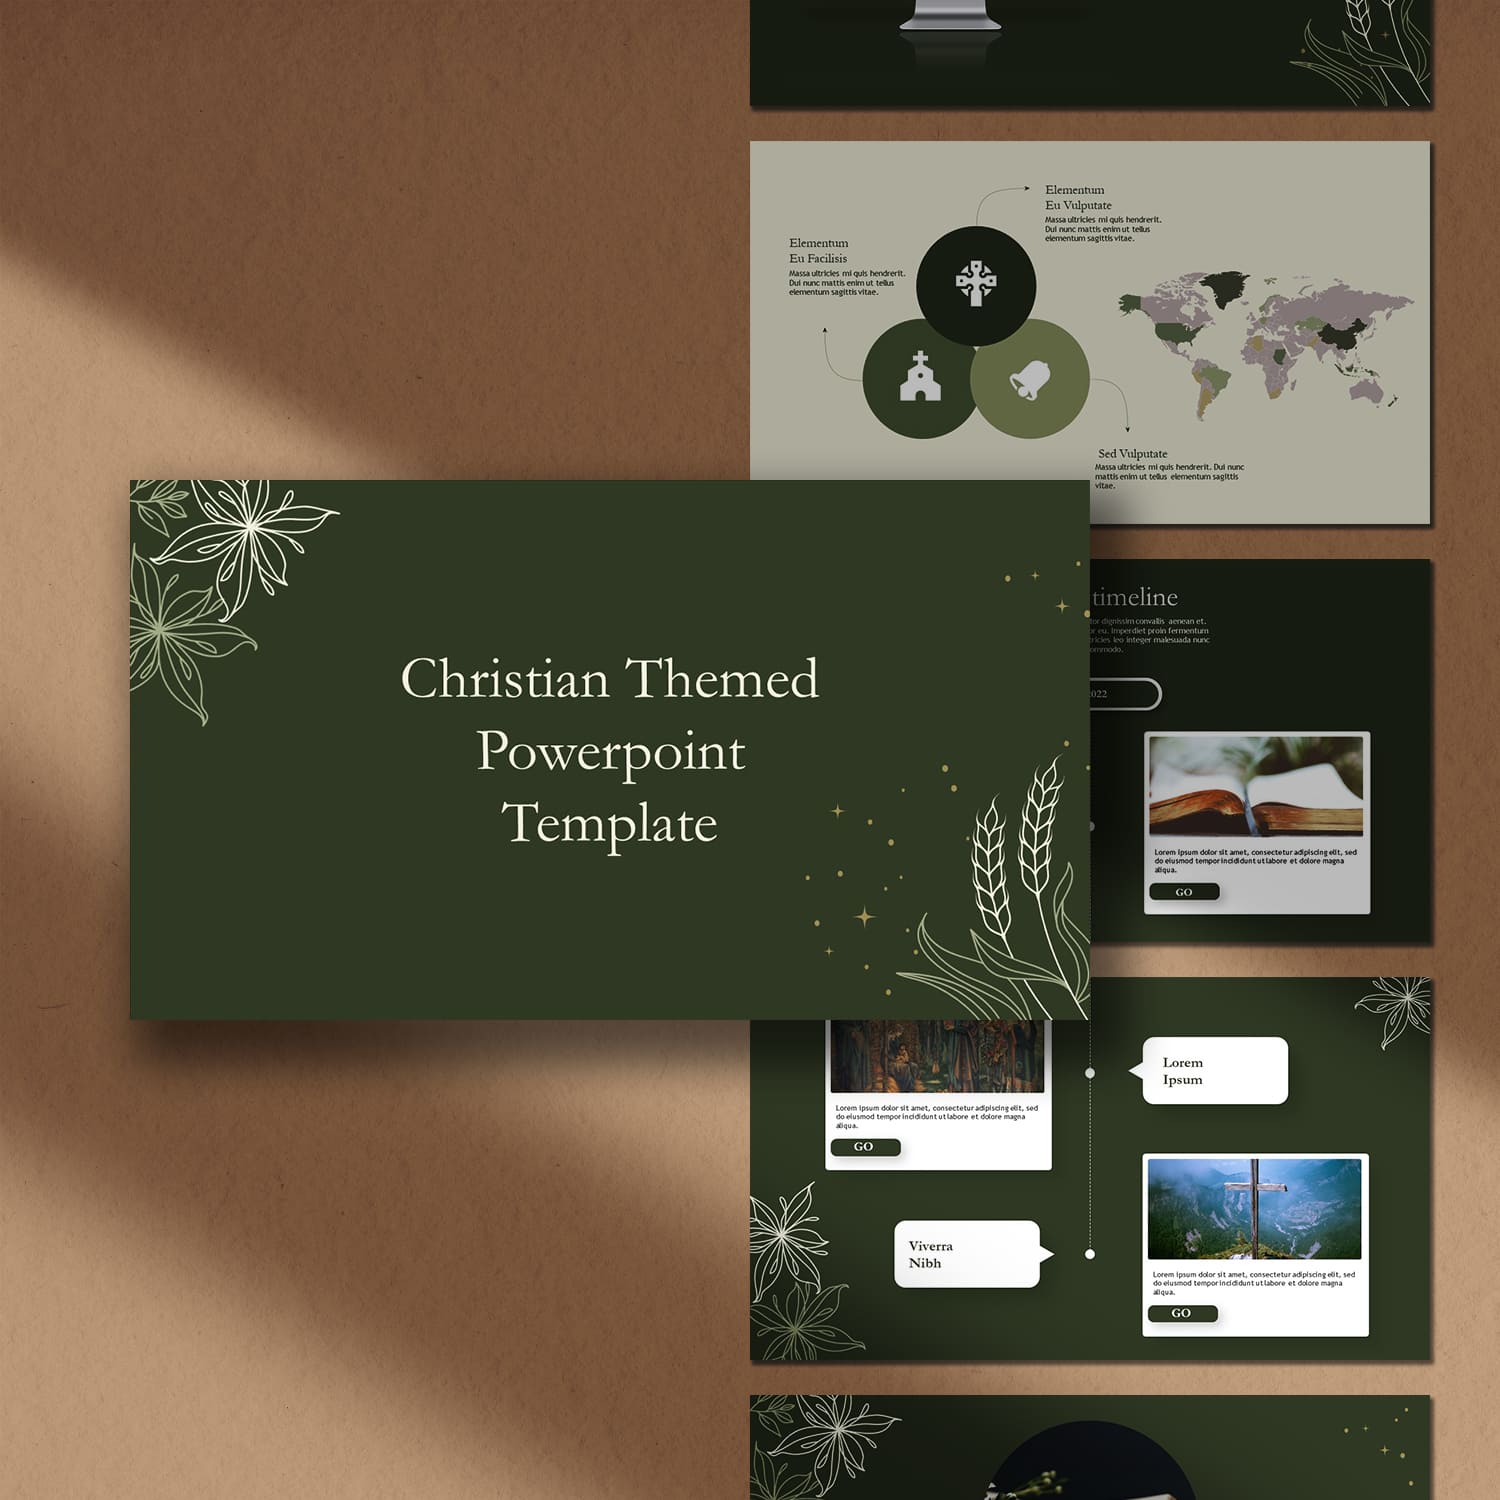 Five Slides of Christian themed powerpoint template.